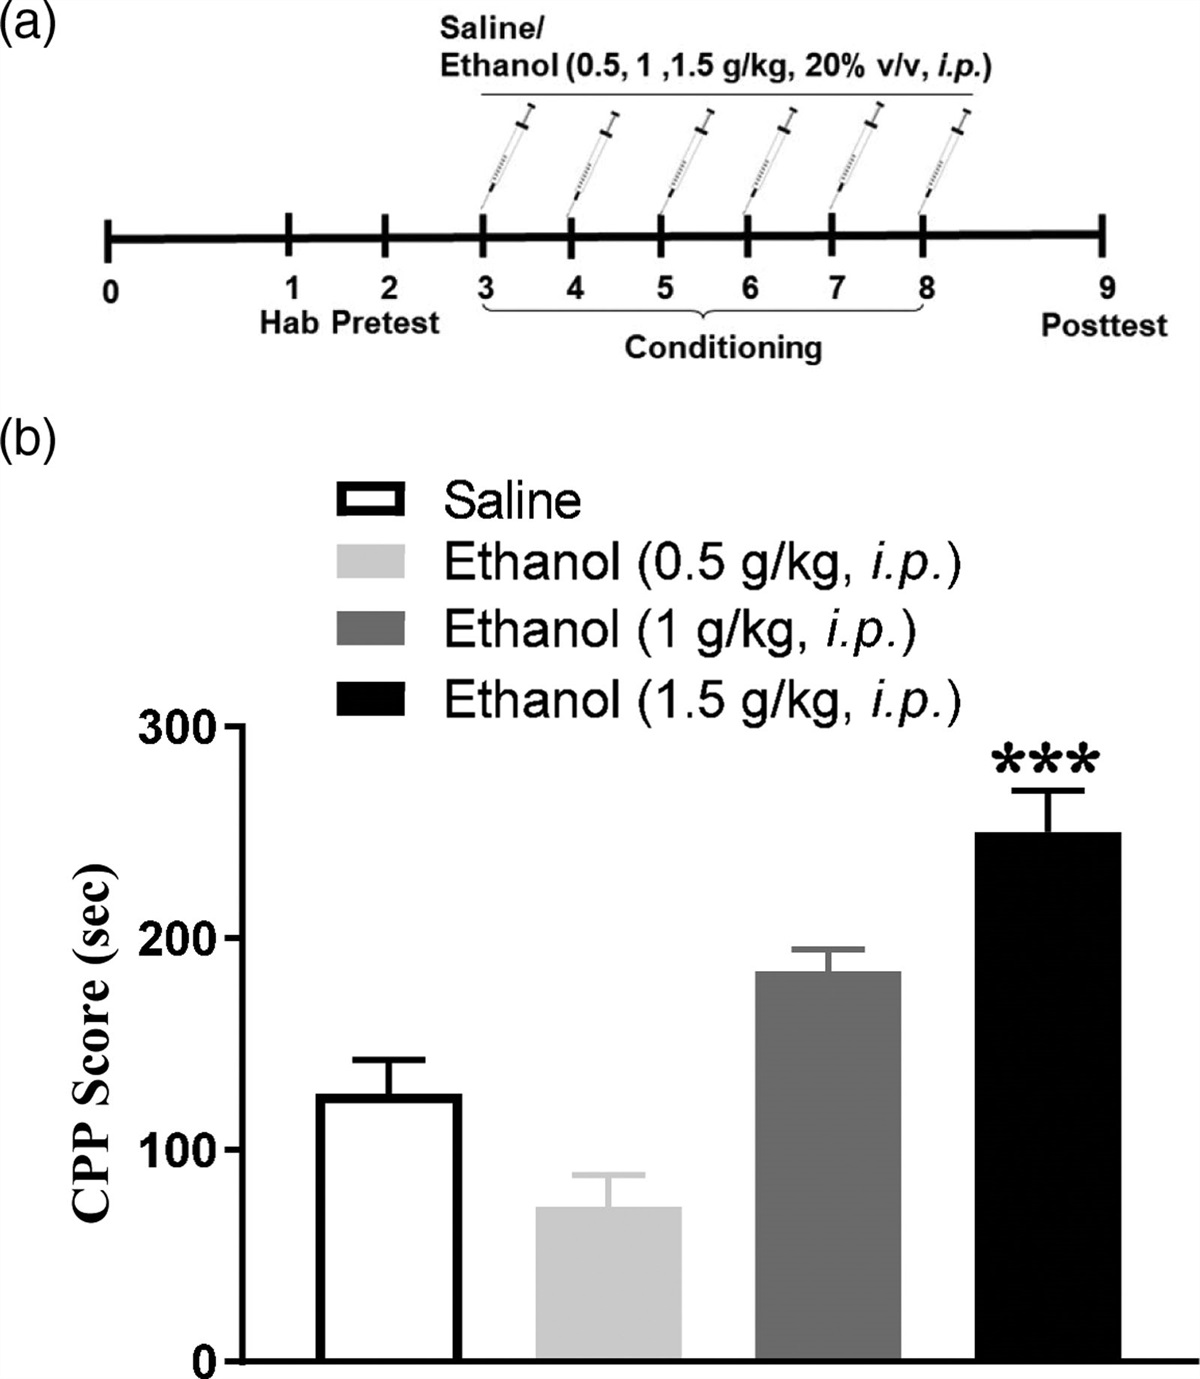 Pharmacological evaluation of lateral habenula and rostromedial tegmental nucleus in the expression of ethanol-induced place preference